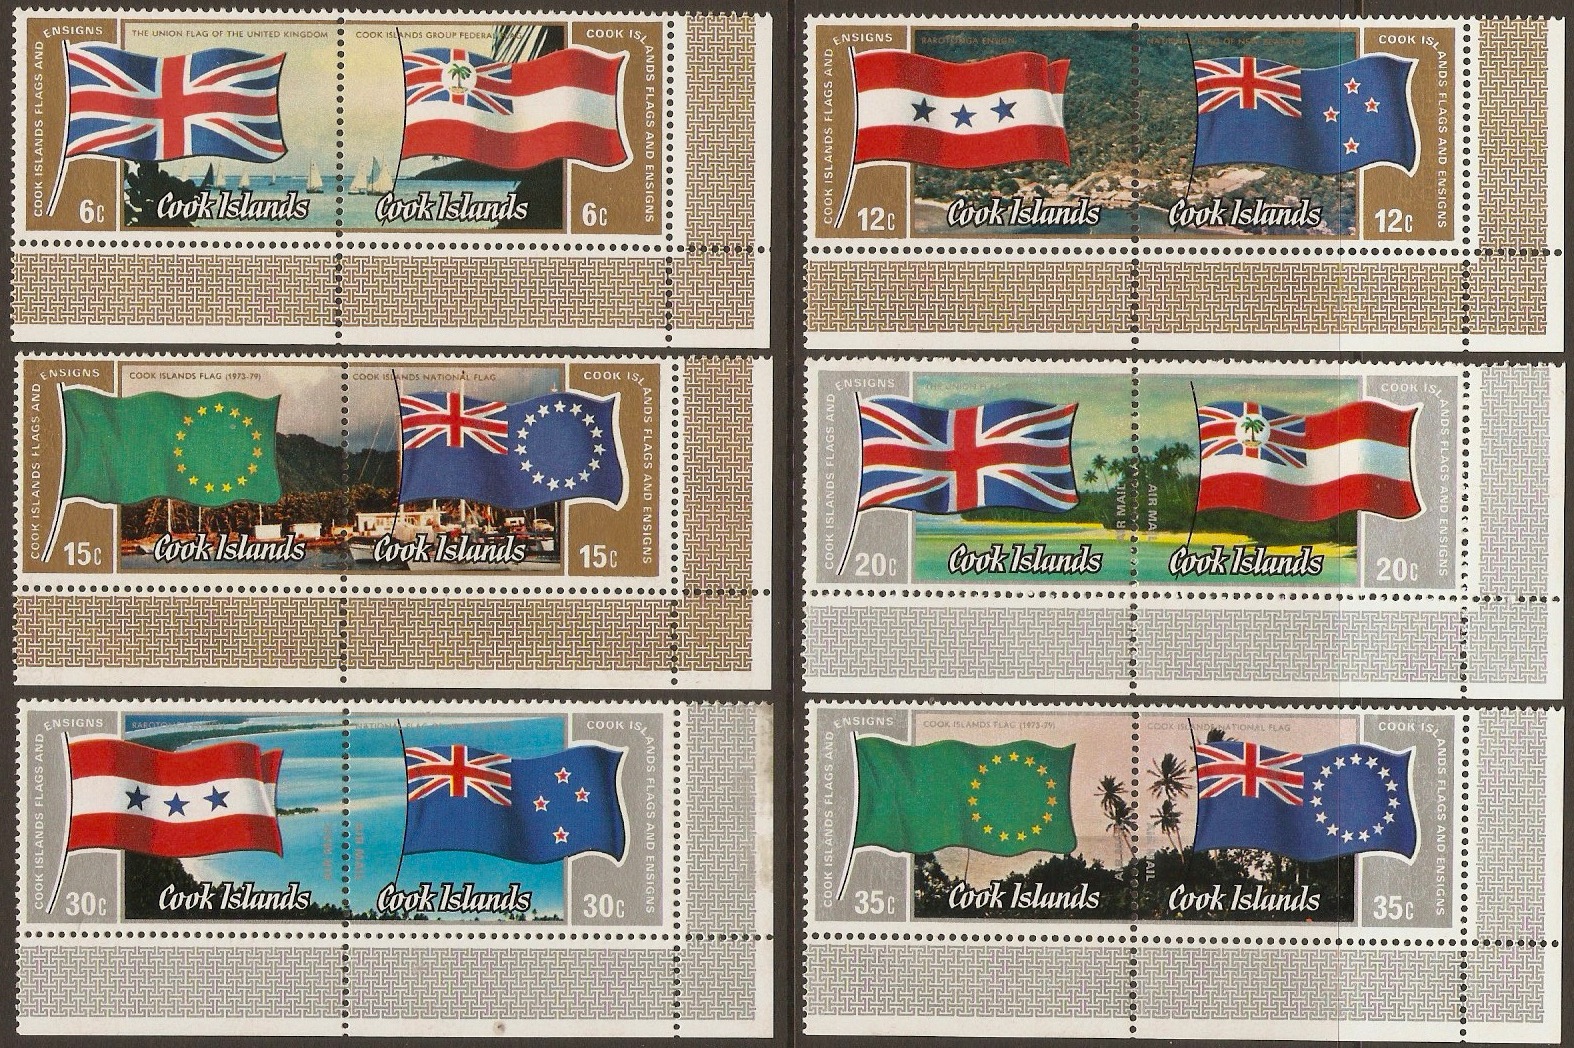 Cook Islands 1983 Flags and Ensigns Set. SG914-SG925.